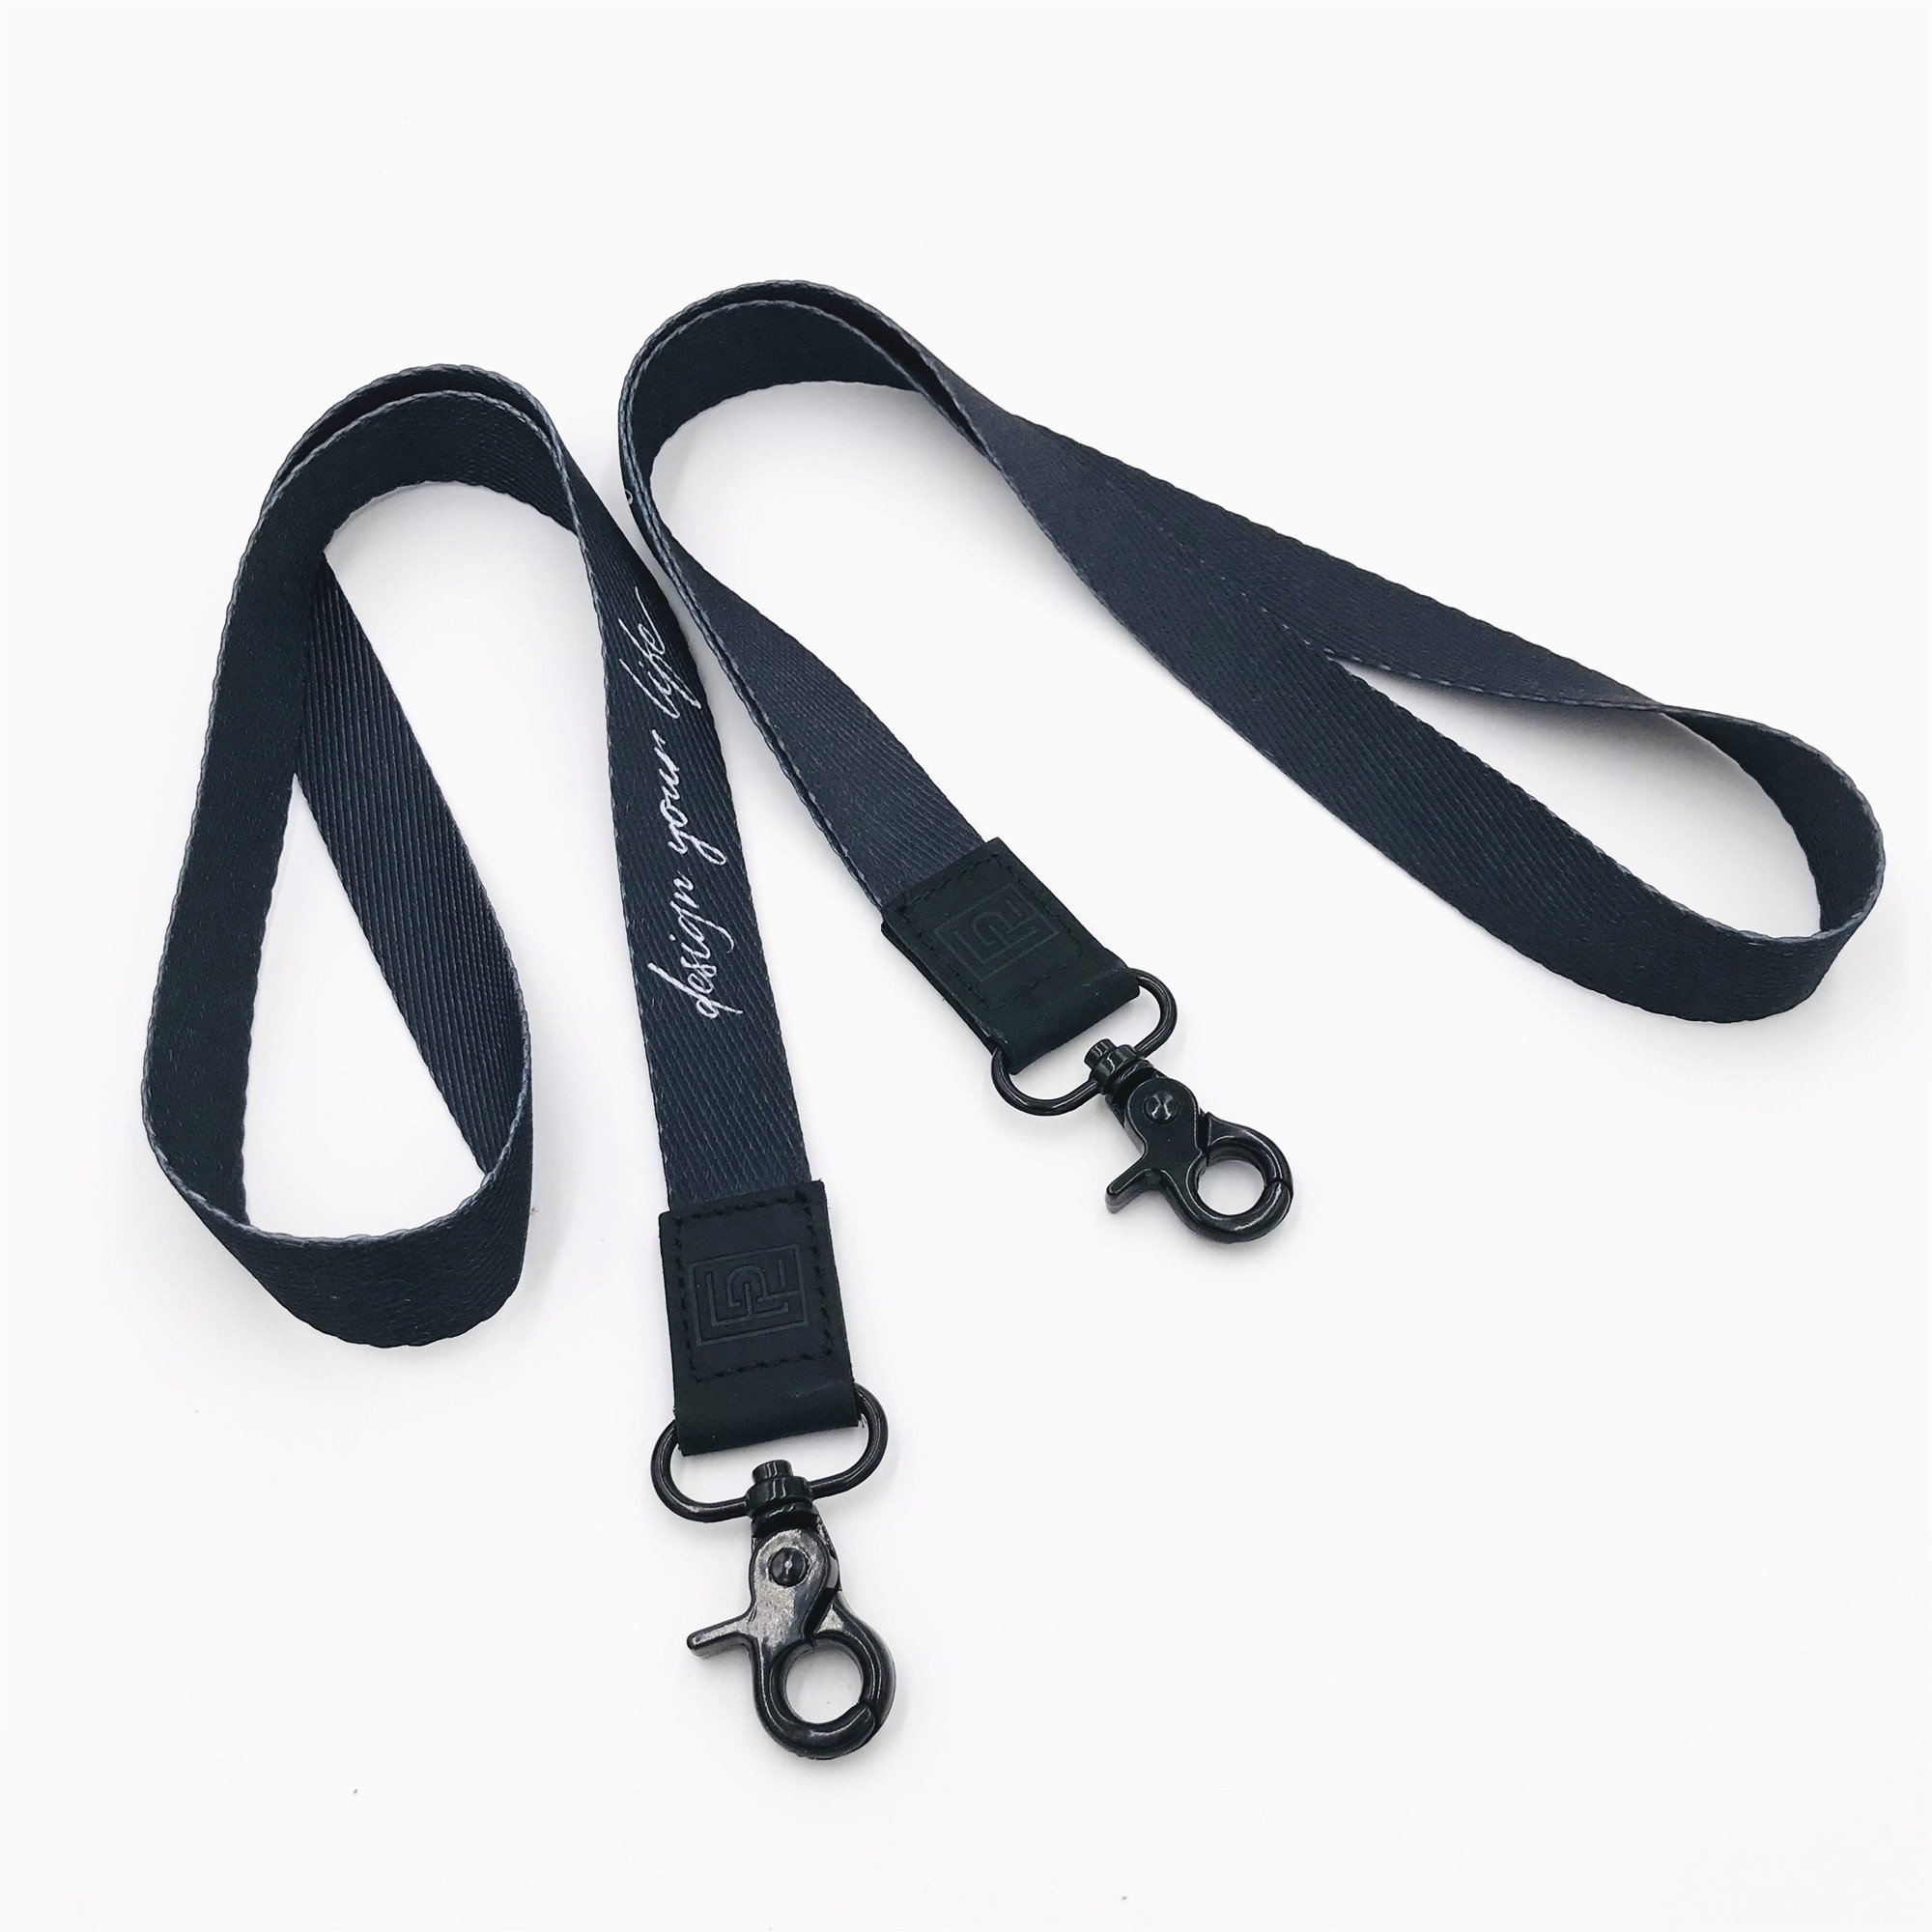 High Quality Heat Transfer Lanyards – Hot selling High quality beautiful phone holder neck lanyards – Bison